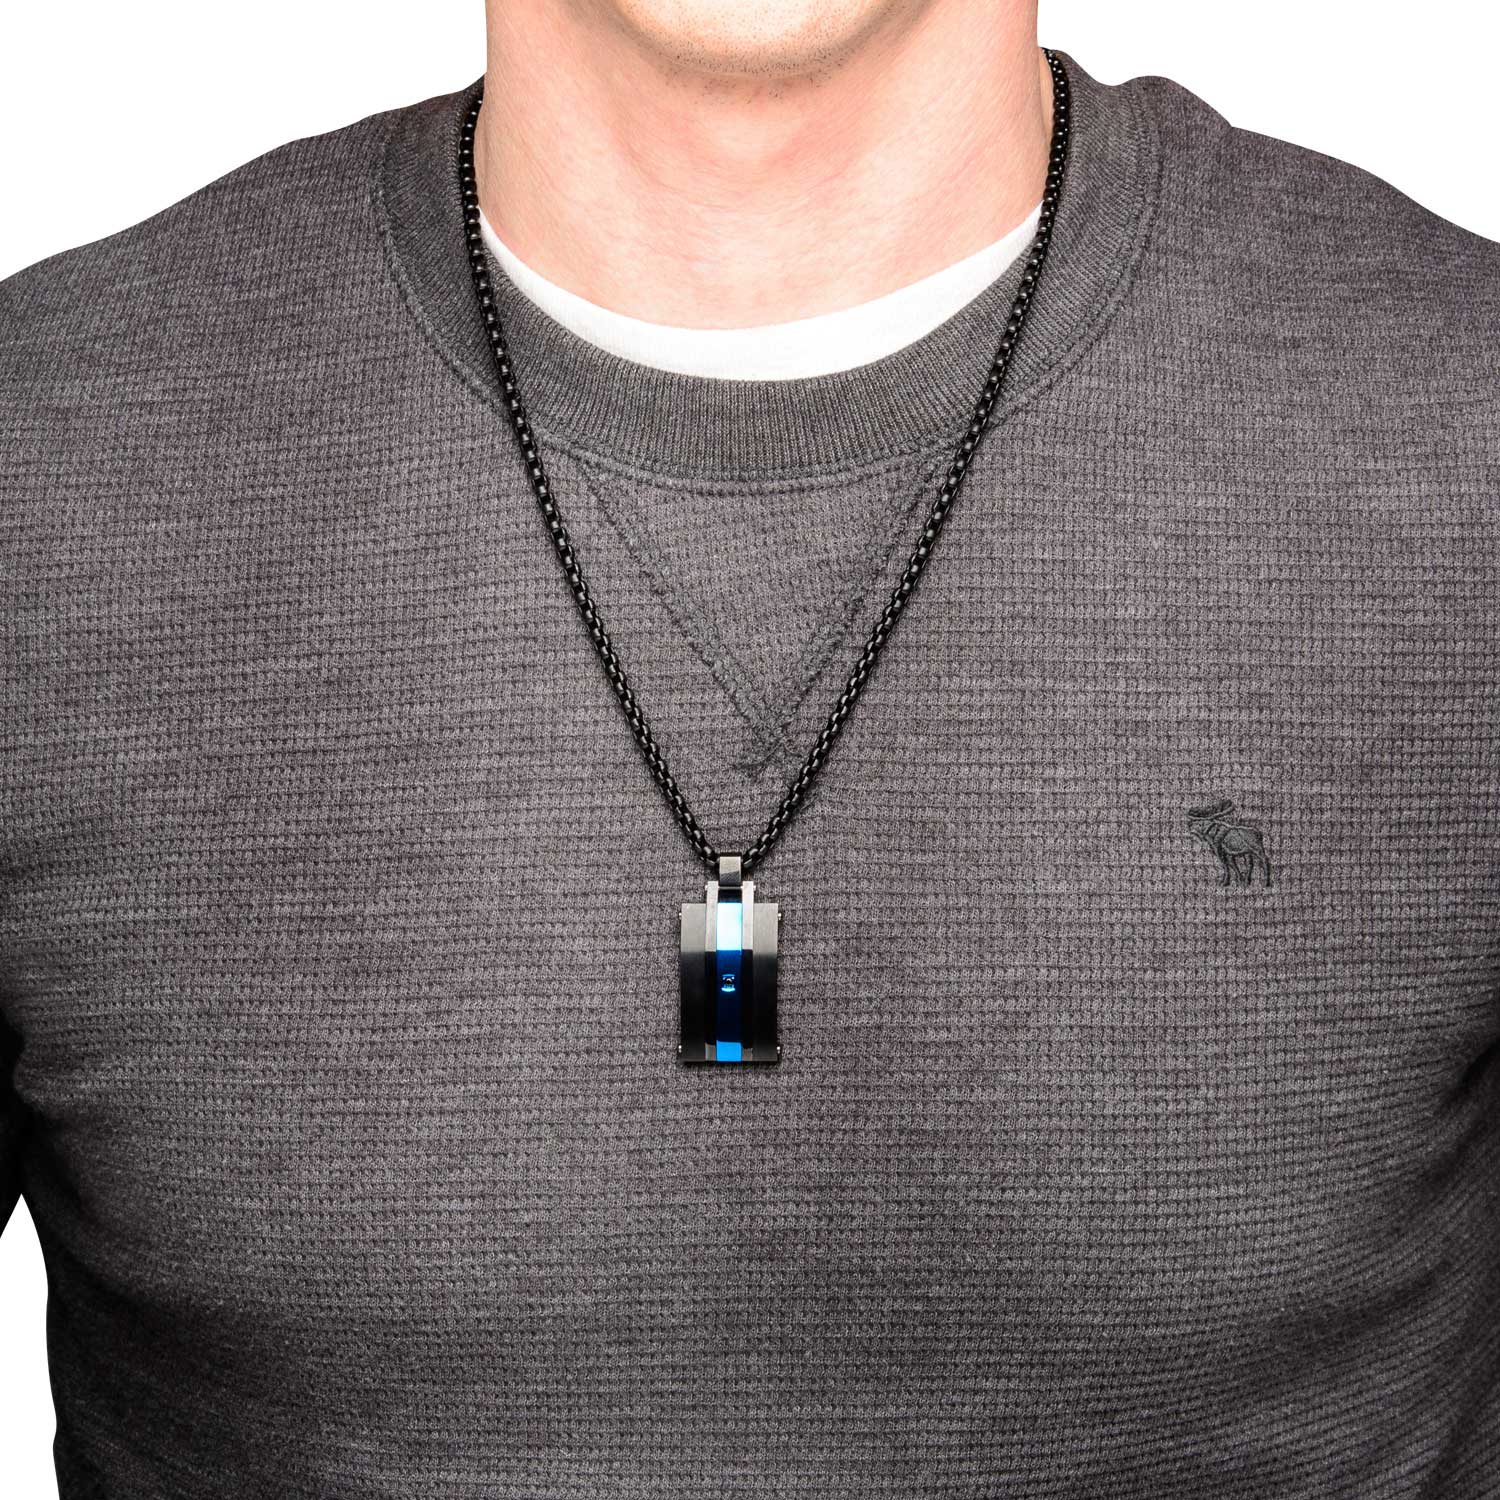 Matte Finished Black & Blue Plated with Black CZ Pendant with Chain Image 4 Midtown Diamonds Reno, NV